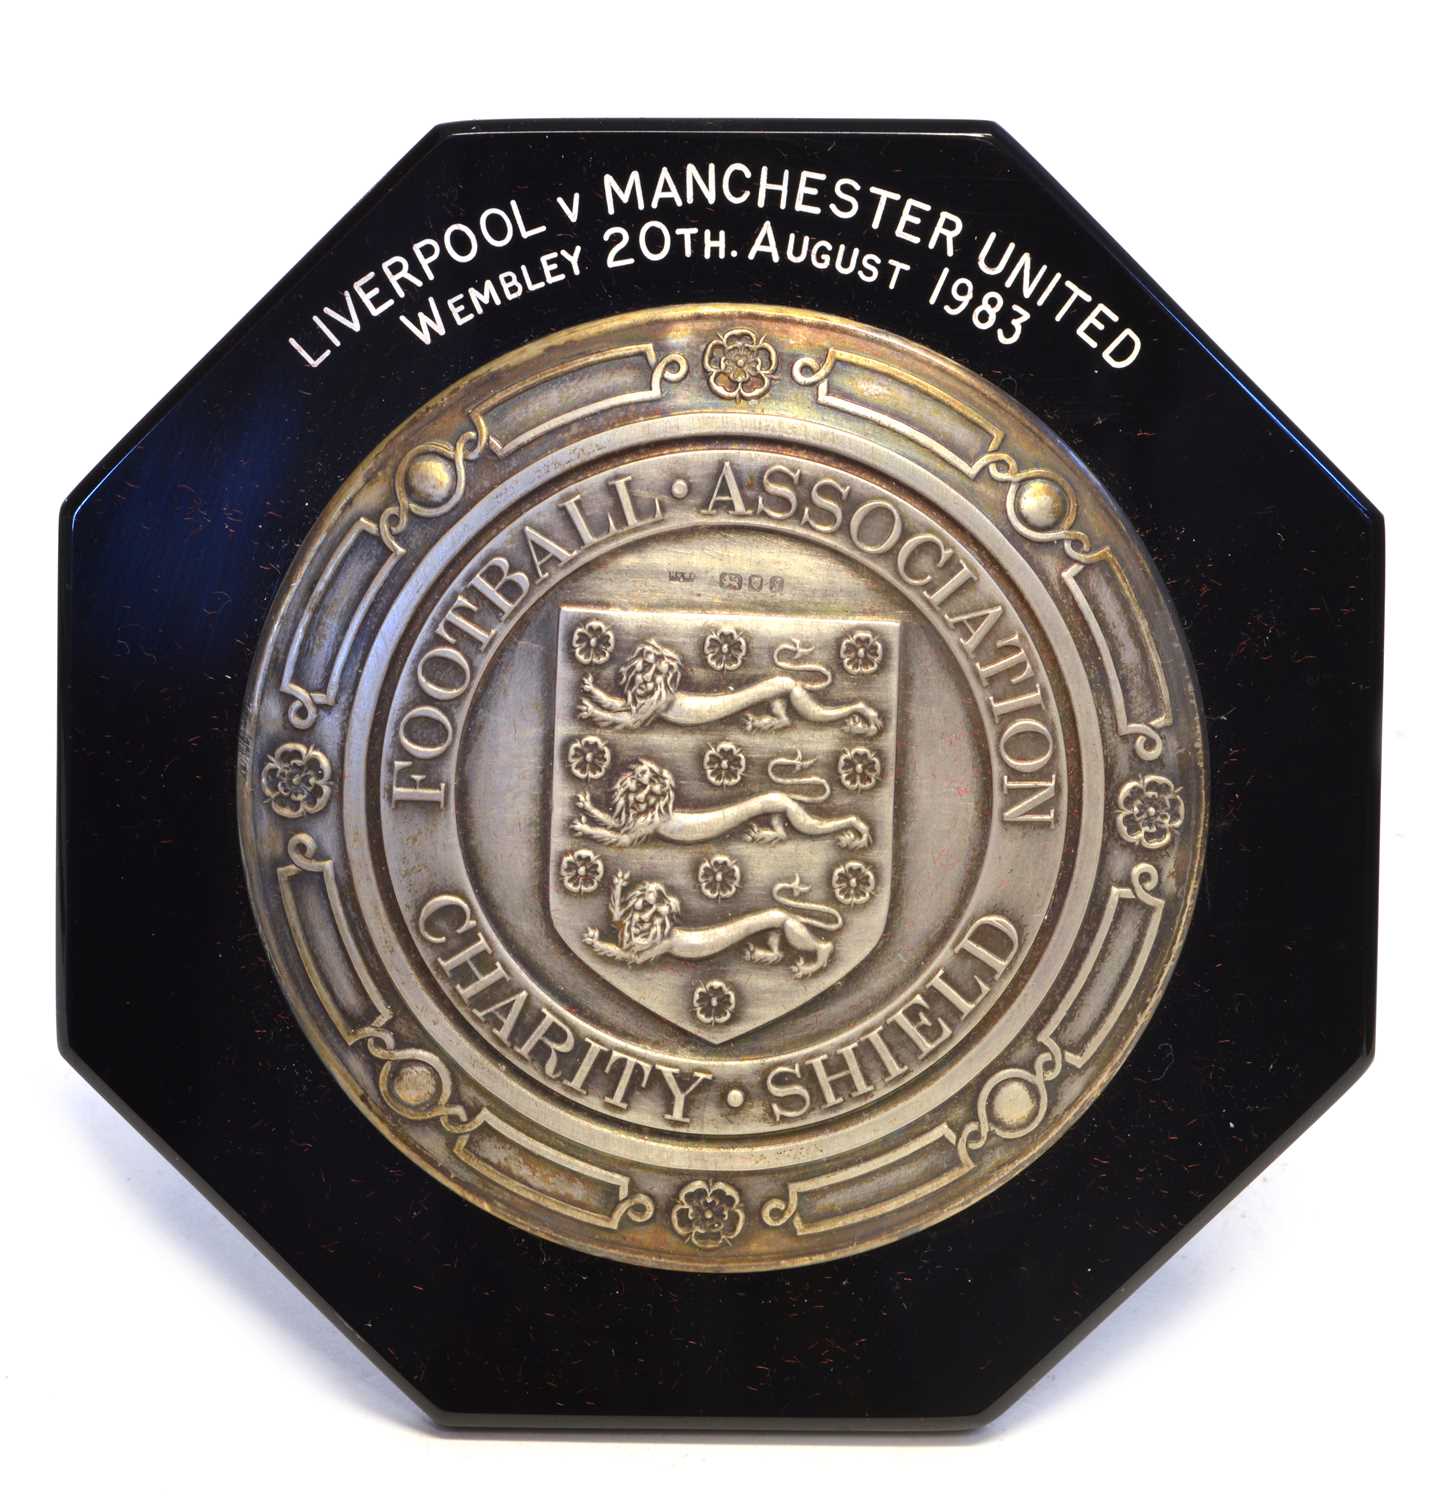 Lot 1 - FA Charity Shield silver plaque by Mappin & Webb